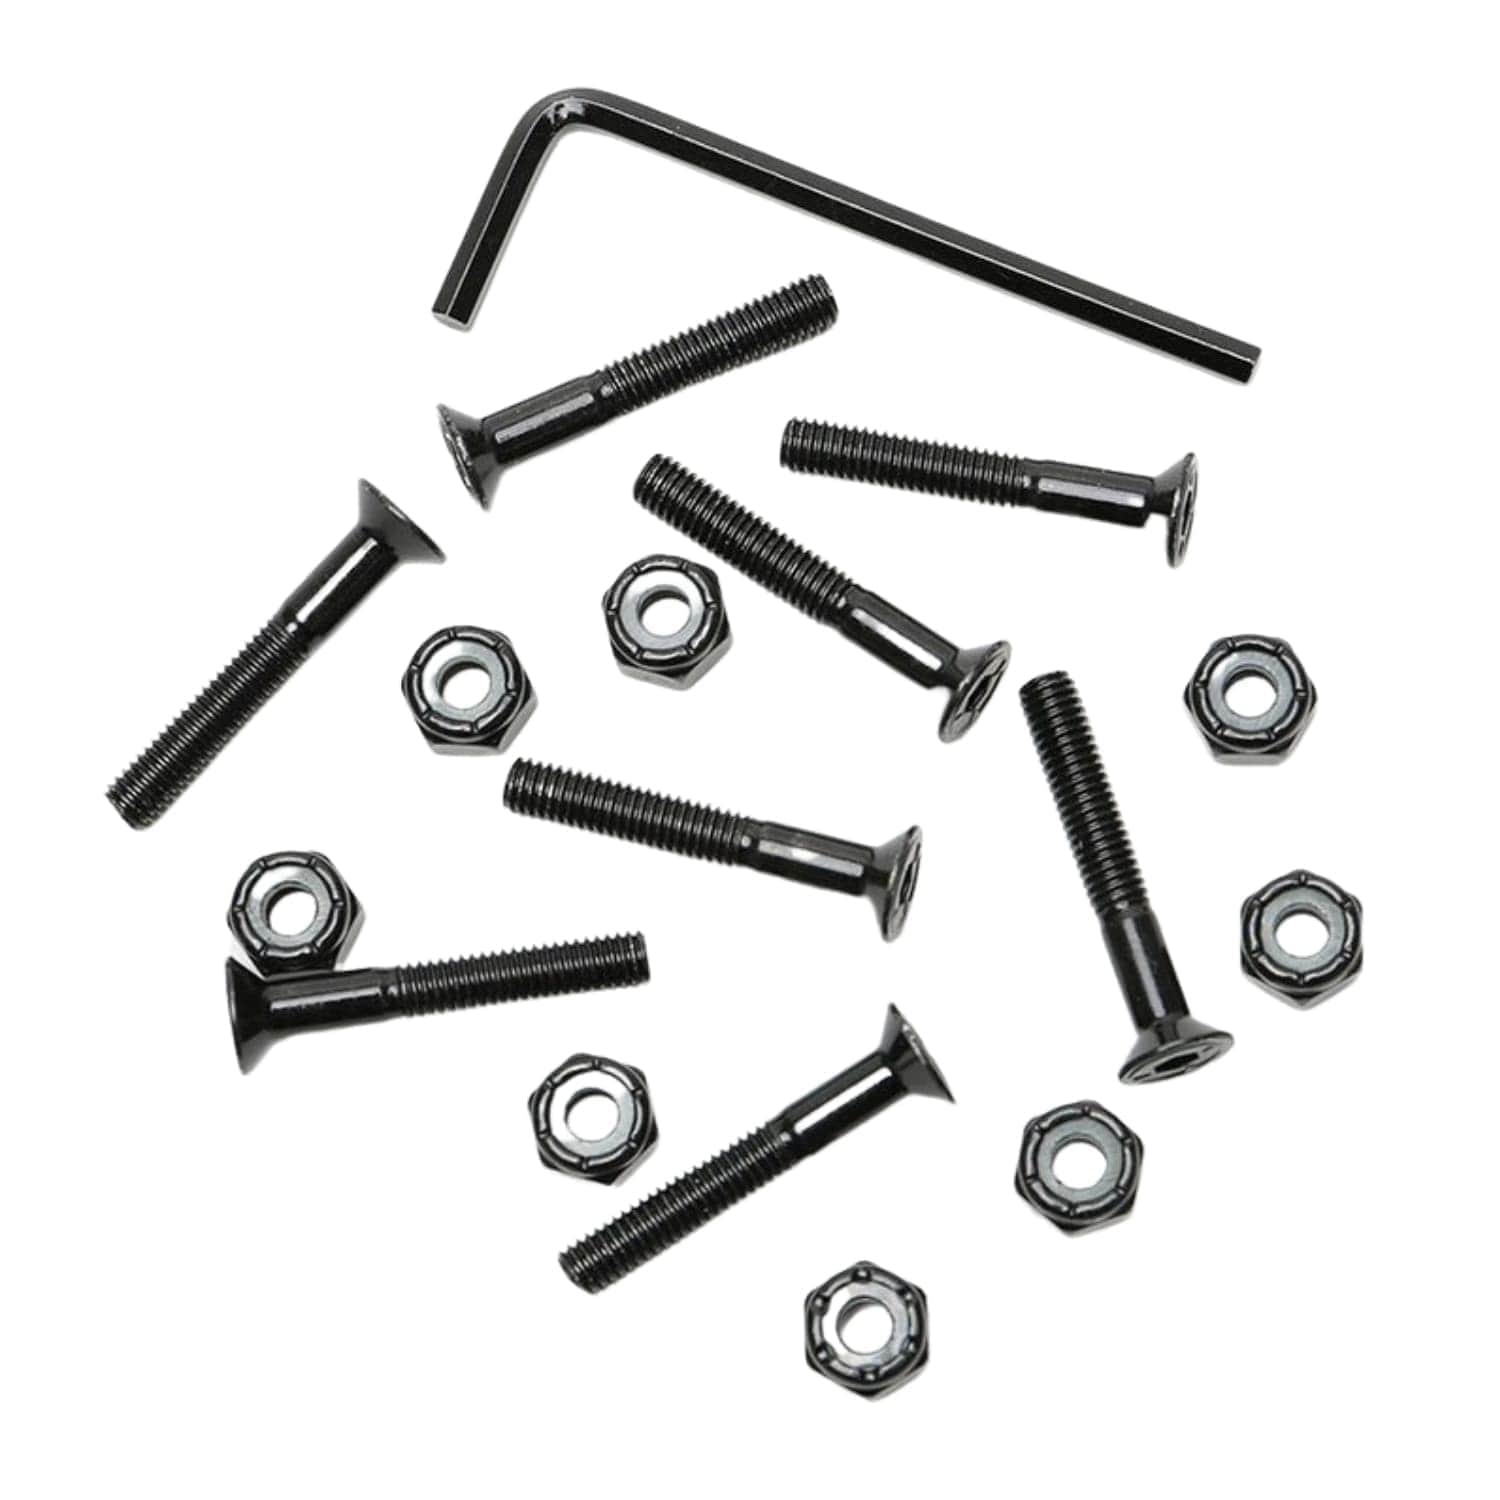 Photos - Other for outdoor activities Sushi Allen Bolts - Black - 1 1/4 inch